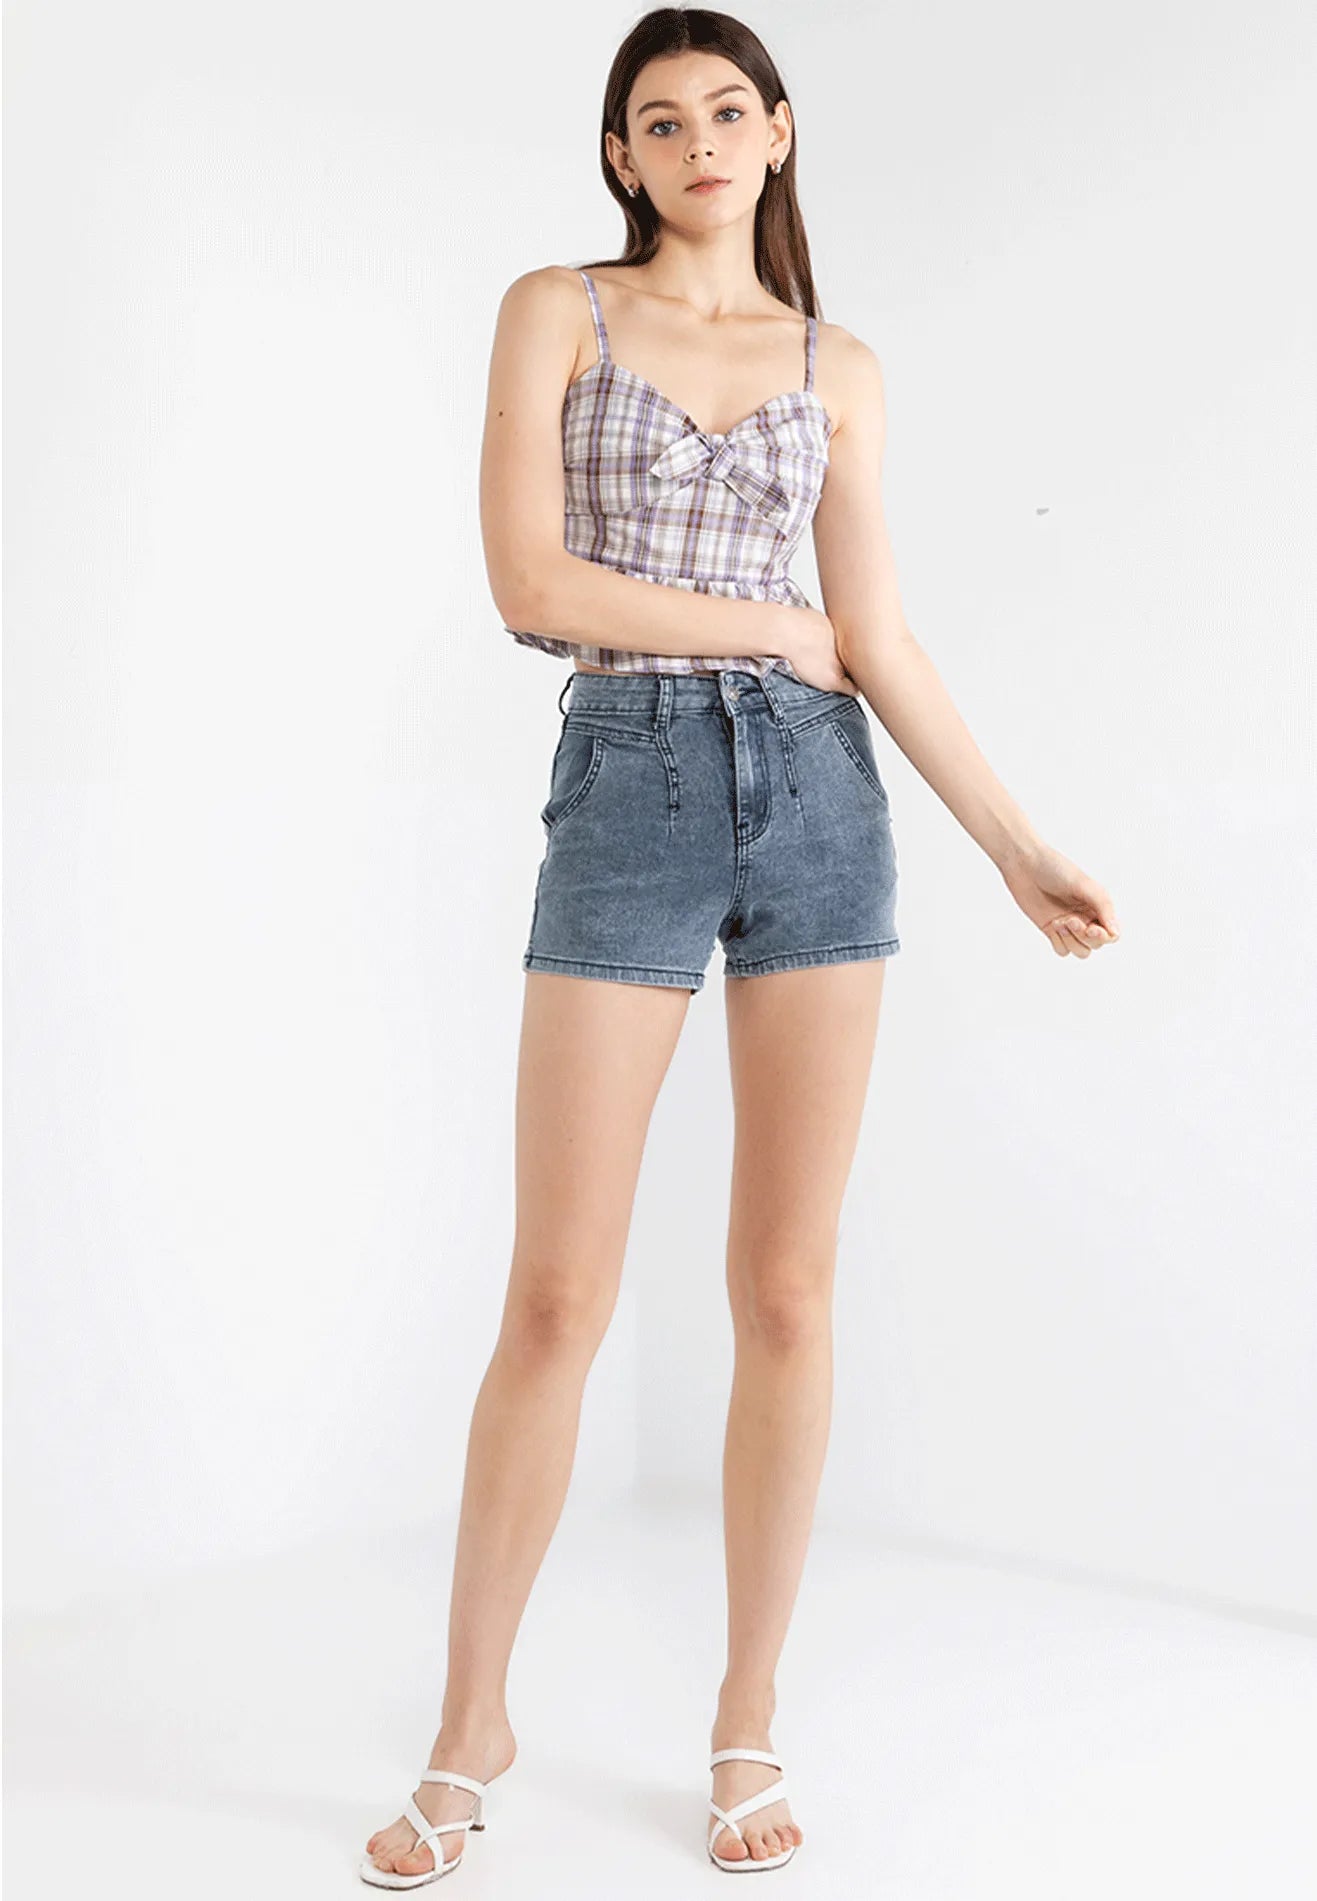 VOIR JEANS Hey Summer Collection: Sweetheart Neck Checkered Bow Top